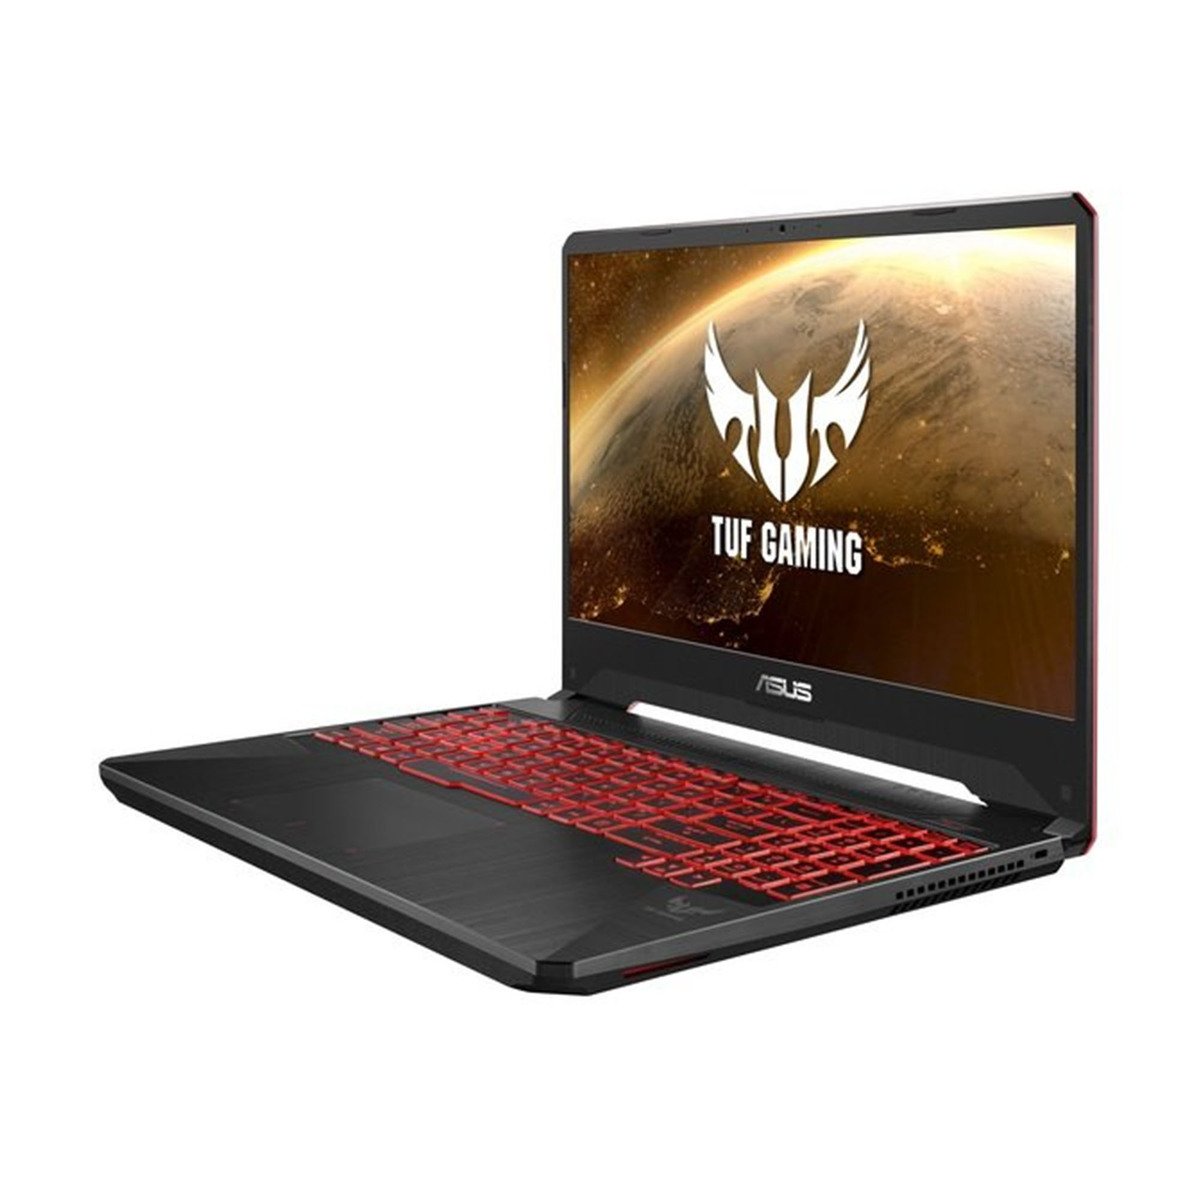 Asus Gaming Notebook FX705DY Black